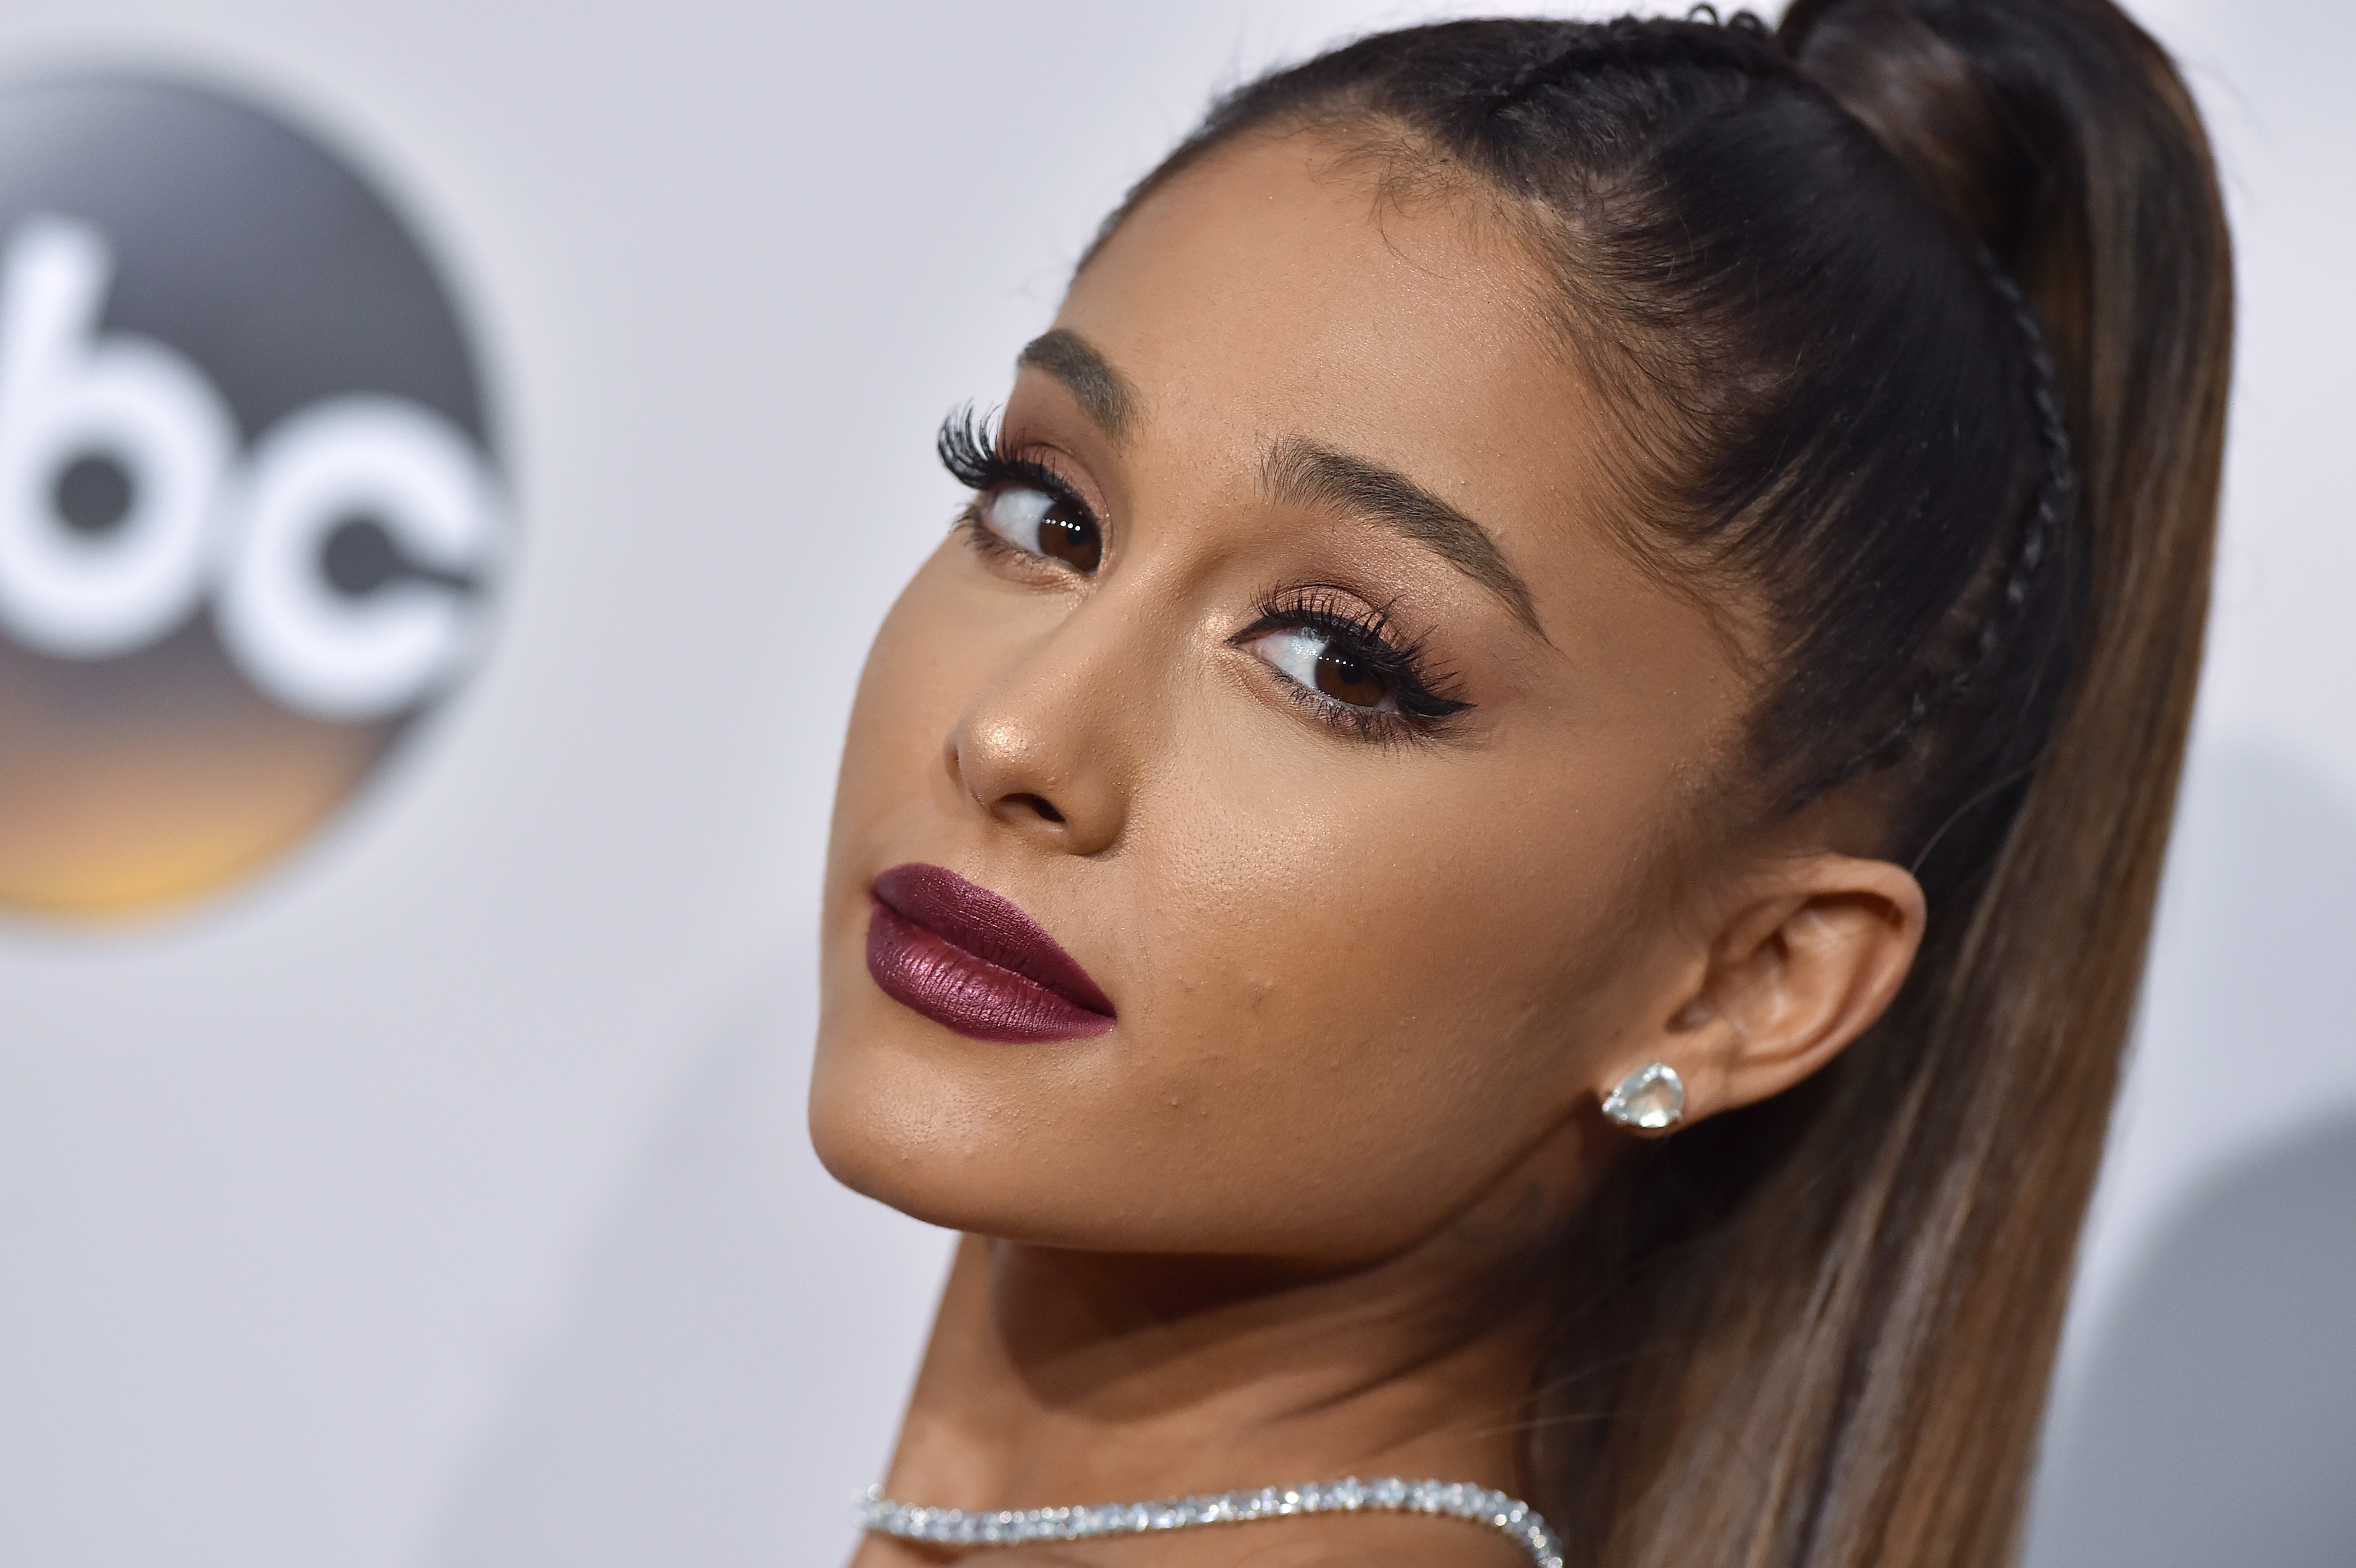 Singer Ariana Grande arrives at the 2016 American Music Awards at Microsoft Theater on Nov. 20, 2016 in Los Angeles, California. (Axelle/Bauer-Griffin/FilmMagic/Getty Images)